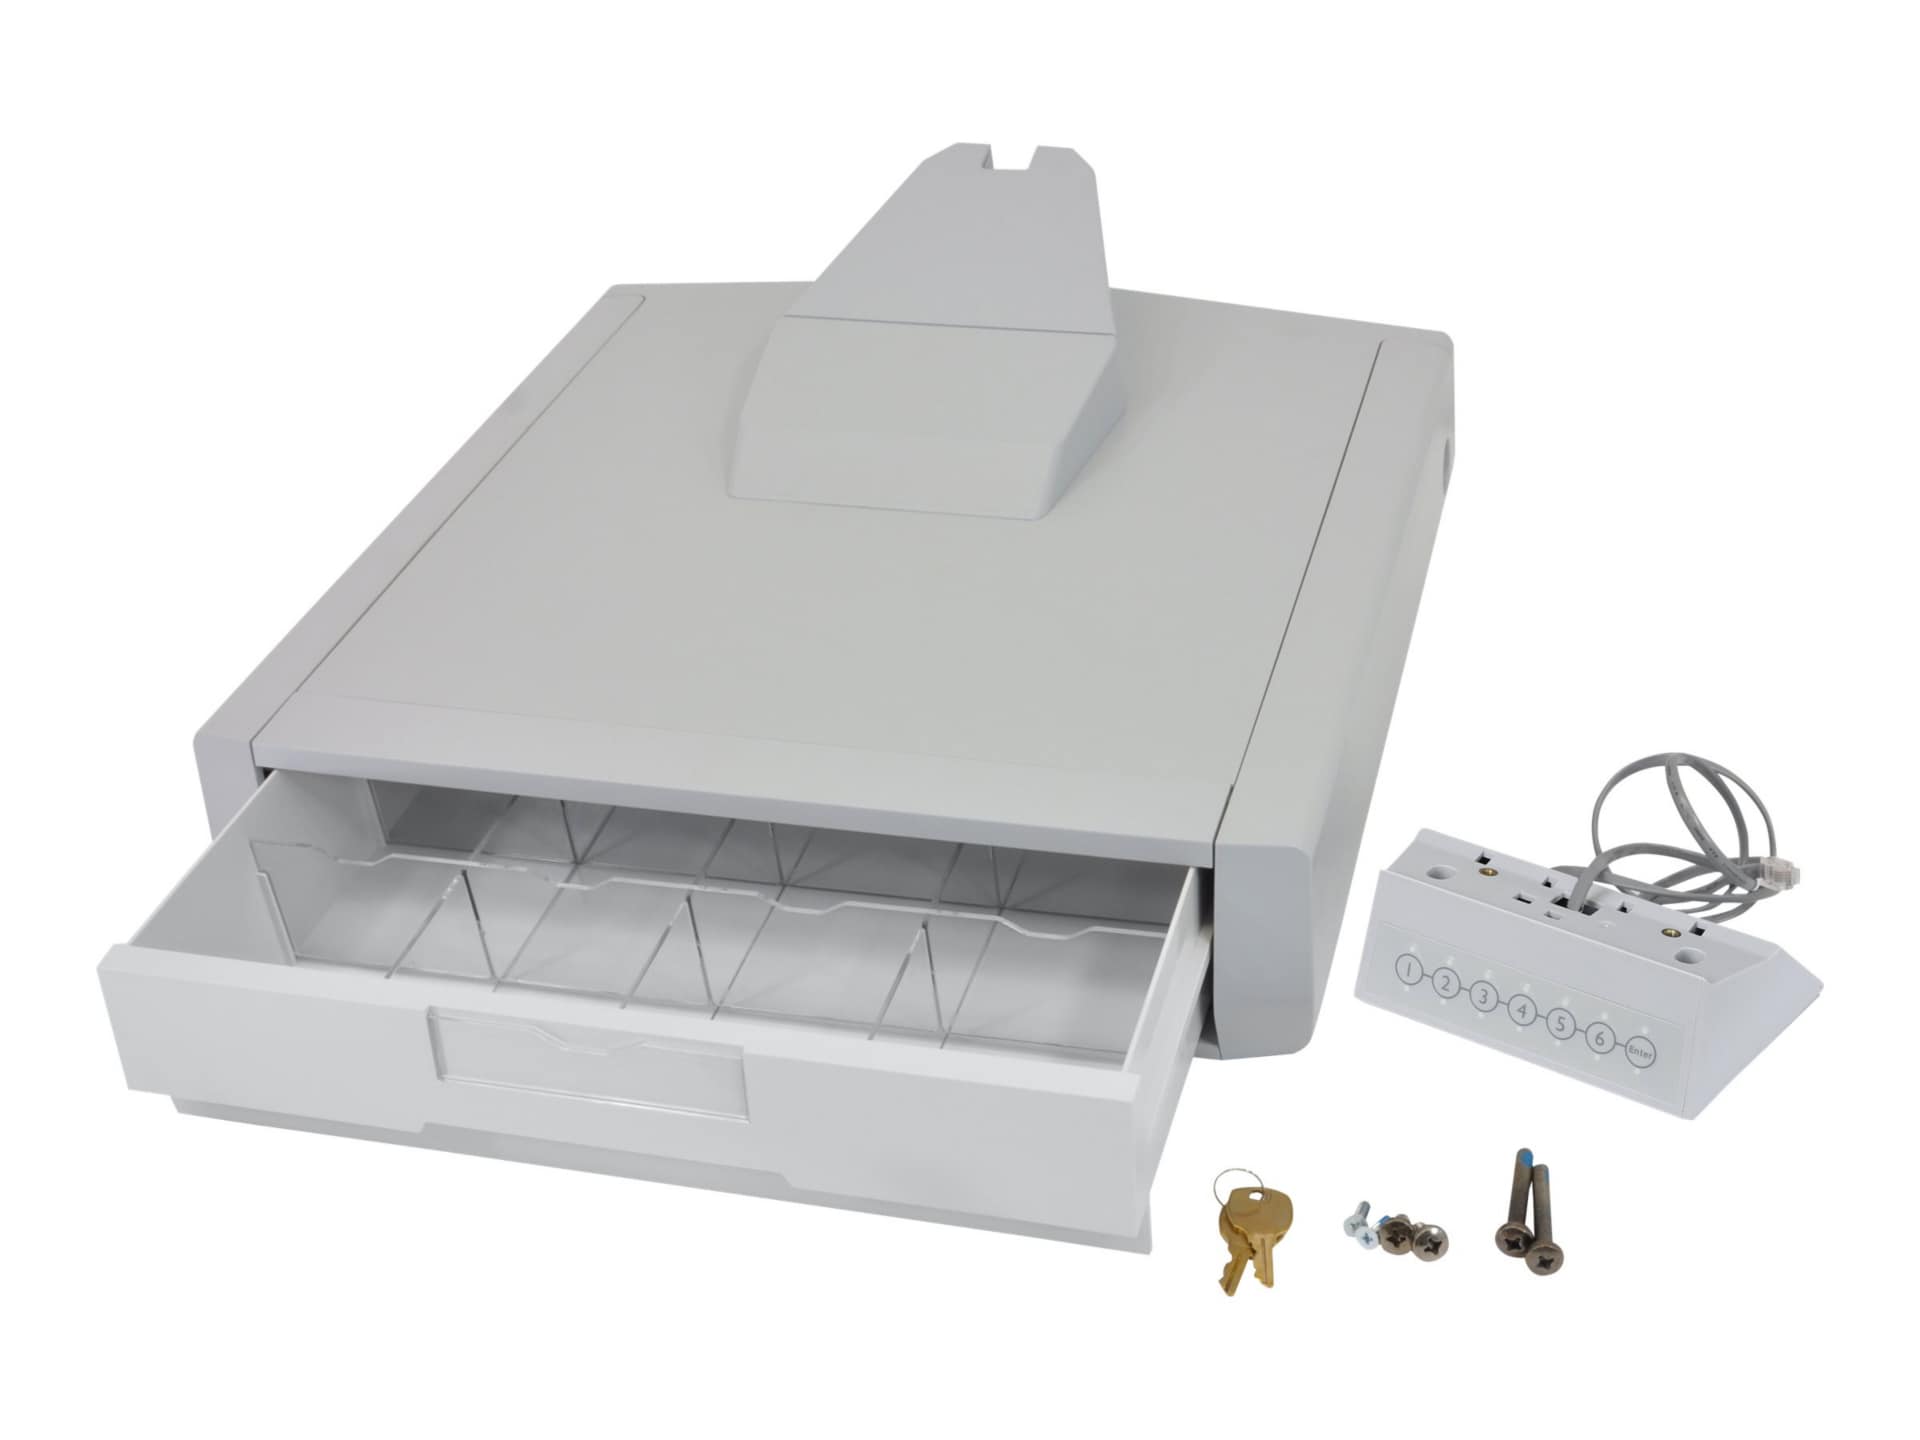 Ergotron SV44 Primary Single Drawer for LCD Cart mounting component - gray, white